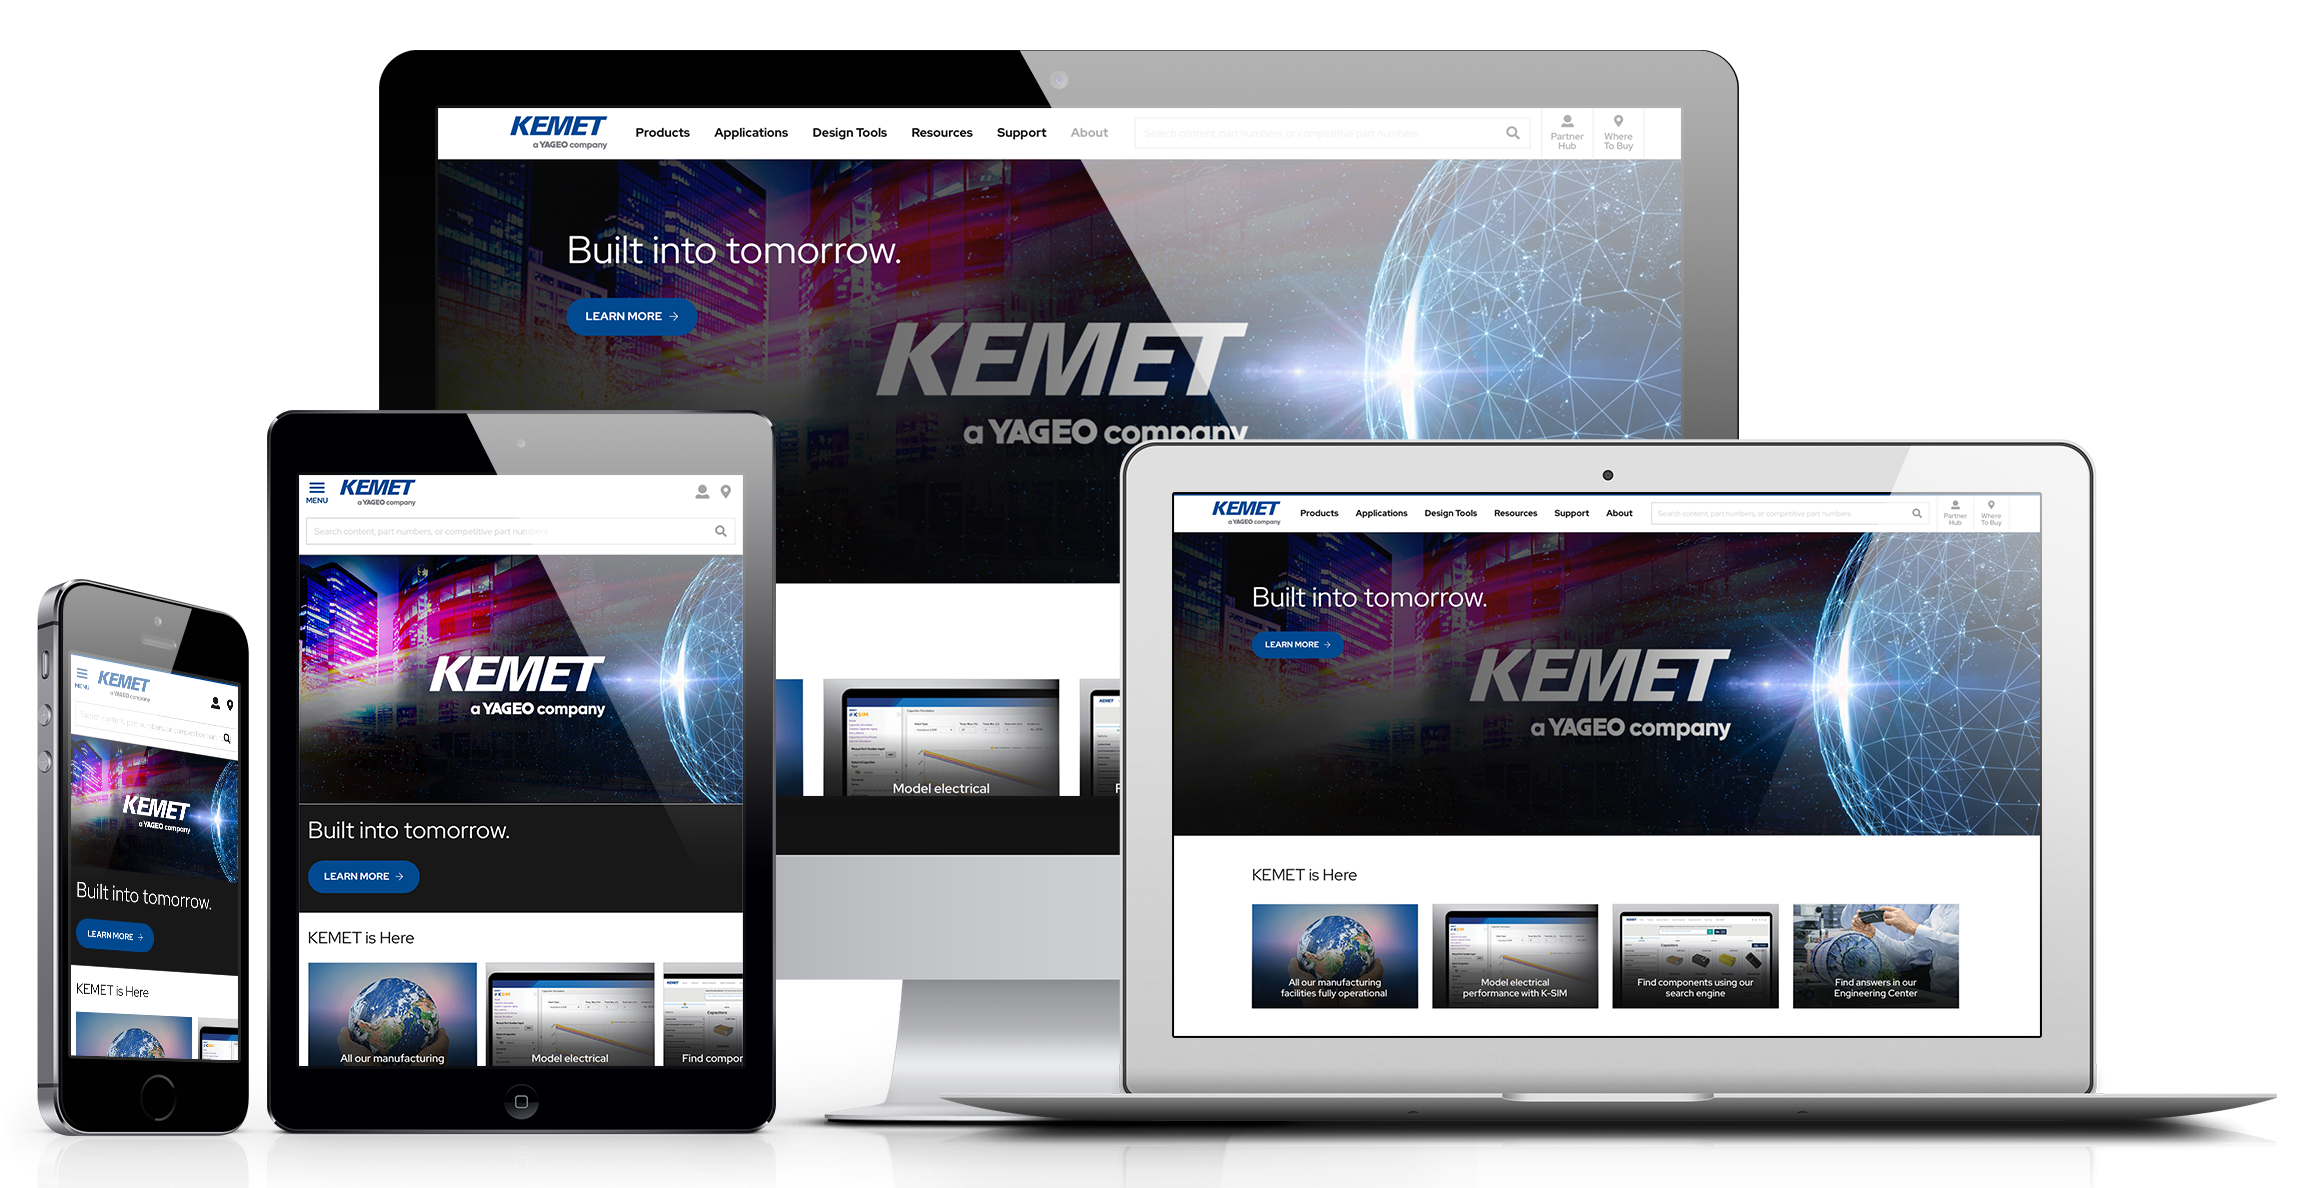 Image of KEMETs website accessible through various devices.